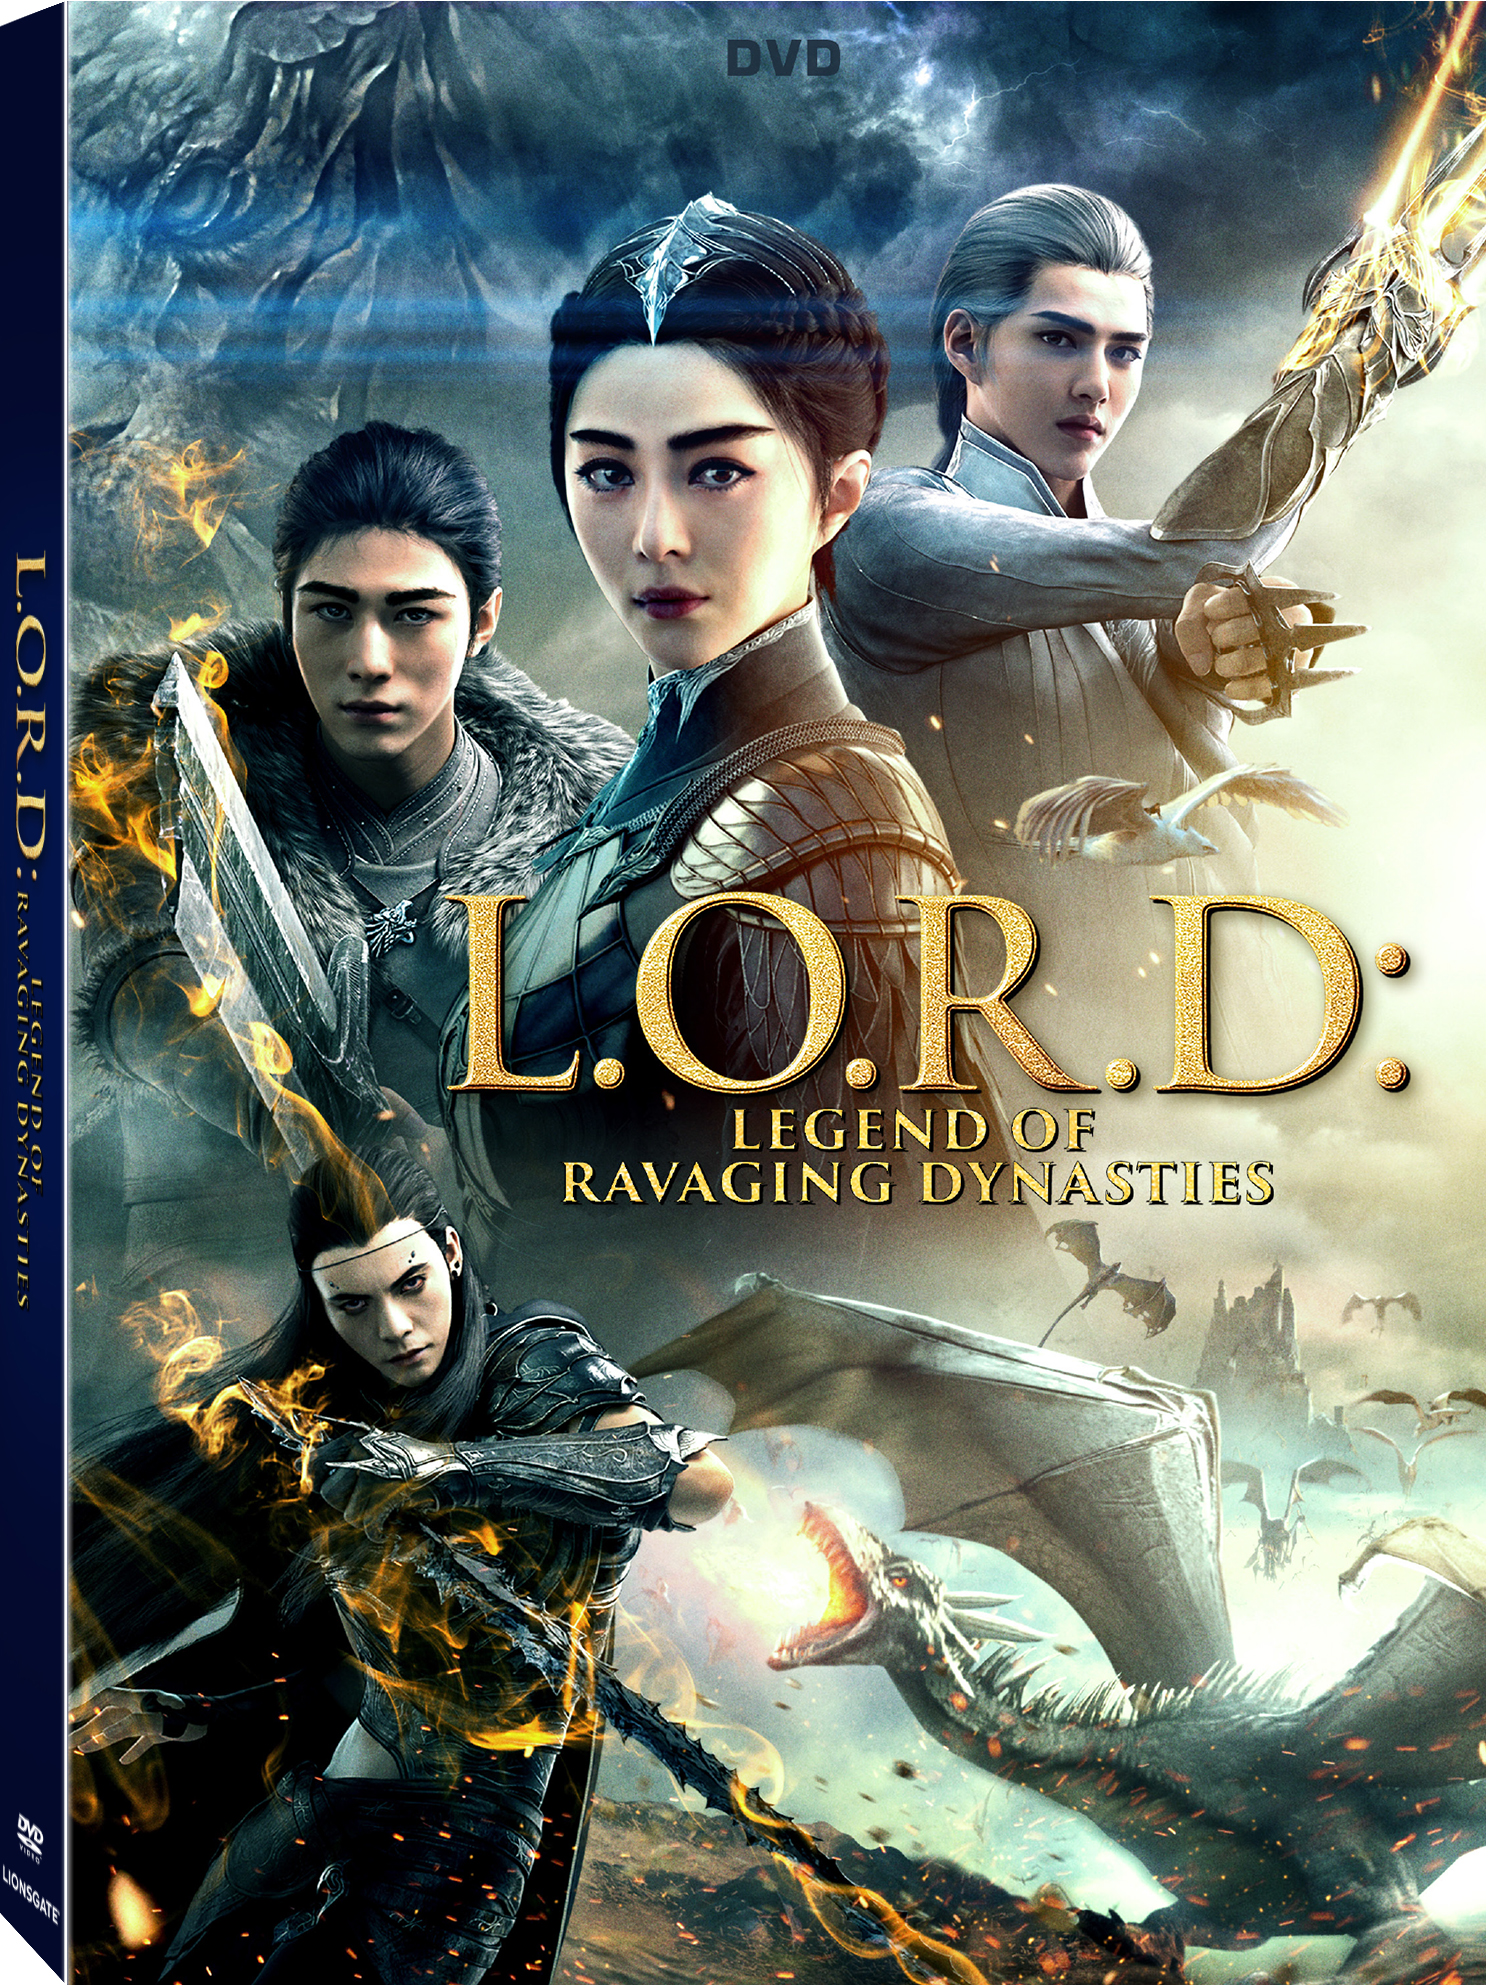 L.O.R.D.: Legend Of Ravaging Dynasties Home Release Info Announced | Nothing But Geek